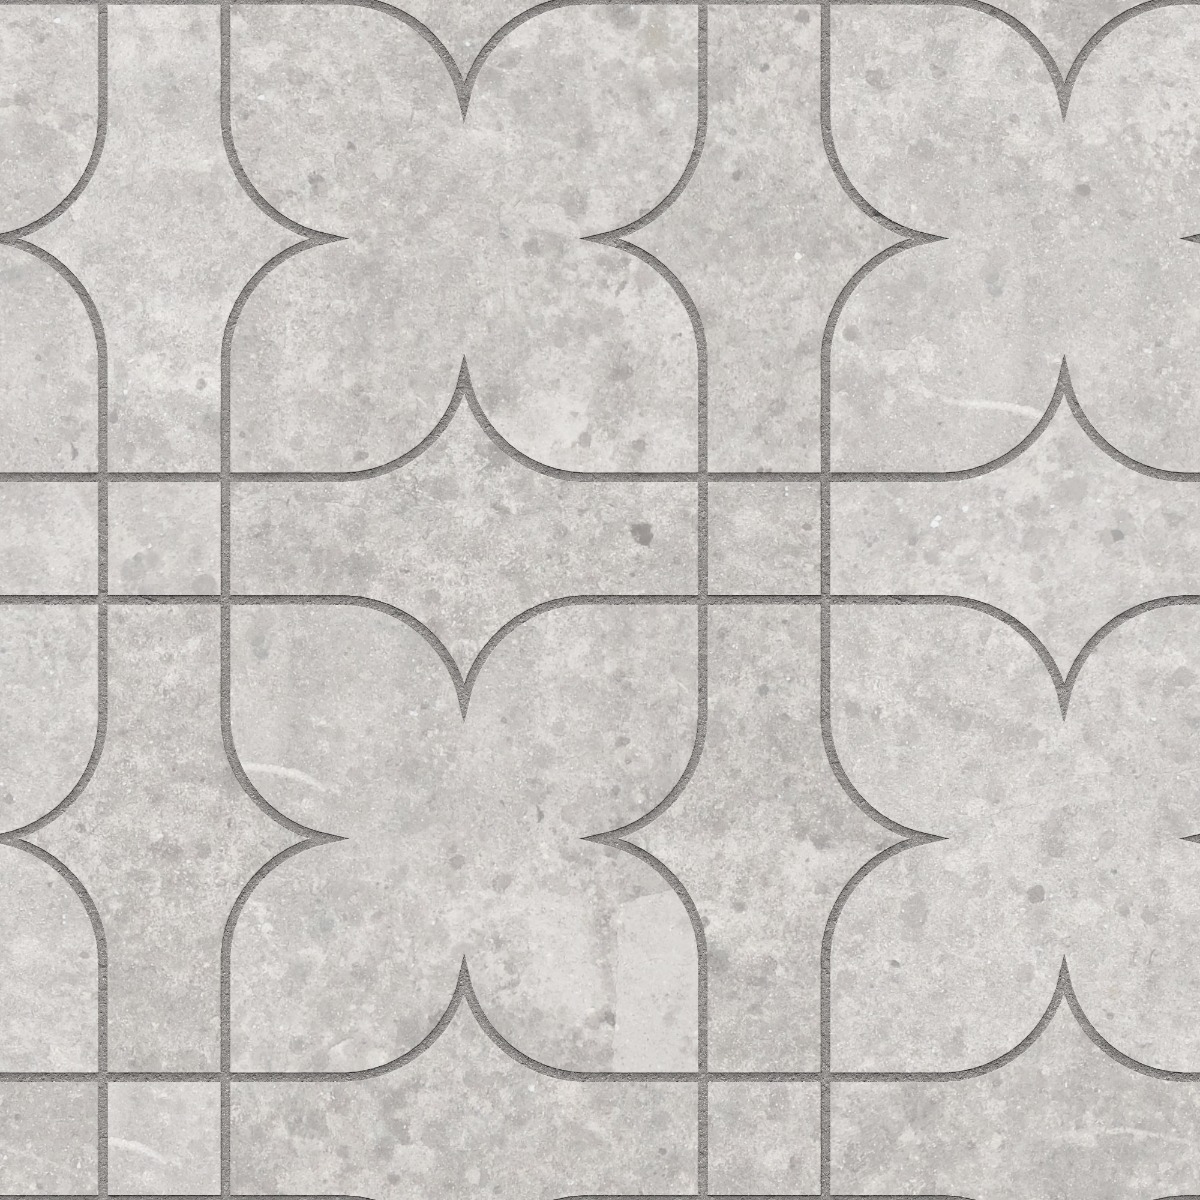 A seamless concrete texture with concrete blocks arranged in a Four Leaf pattern